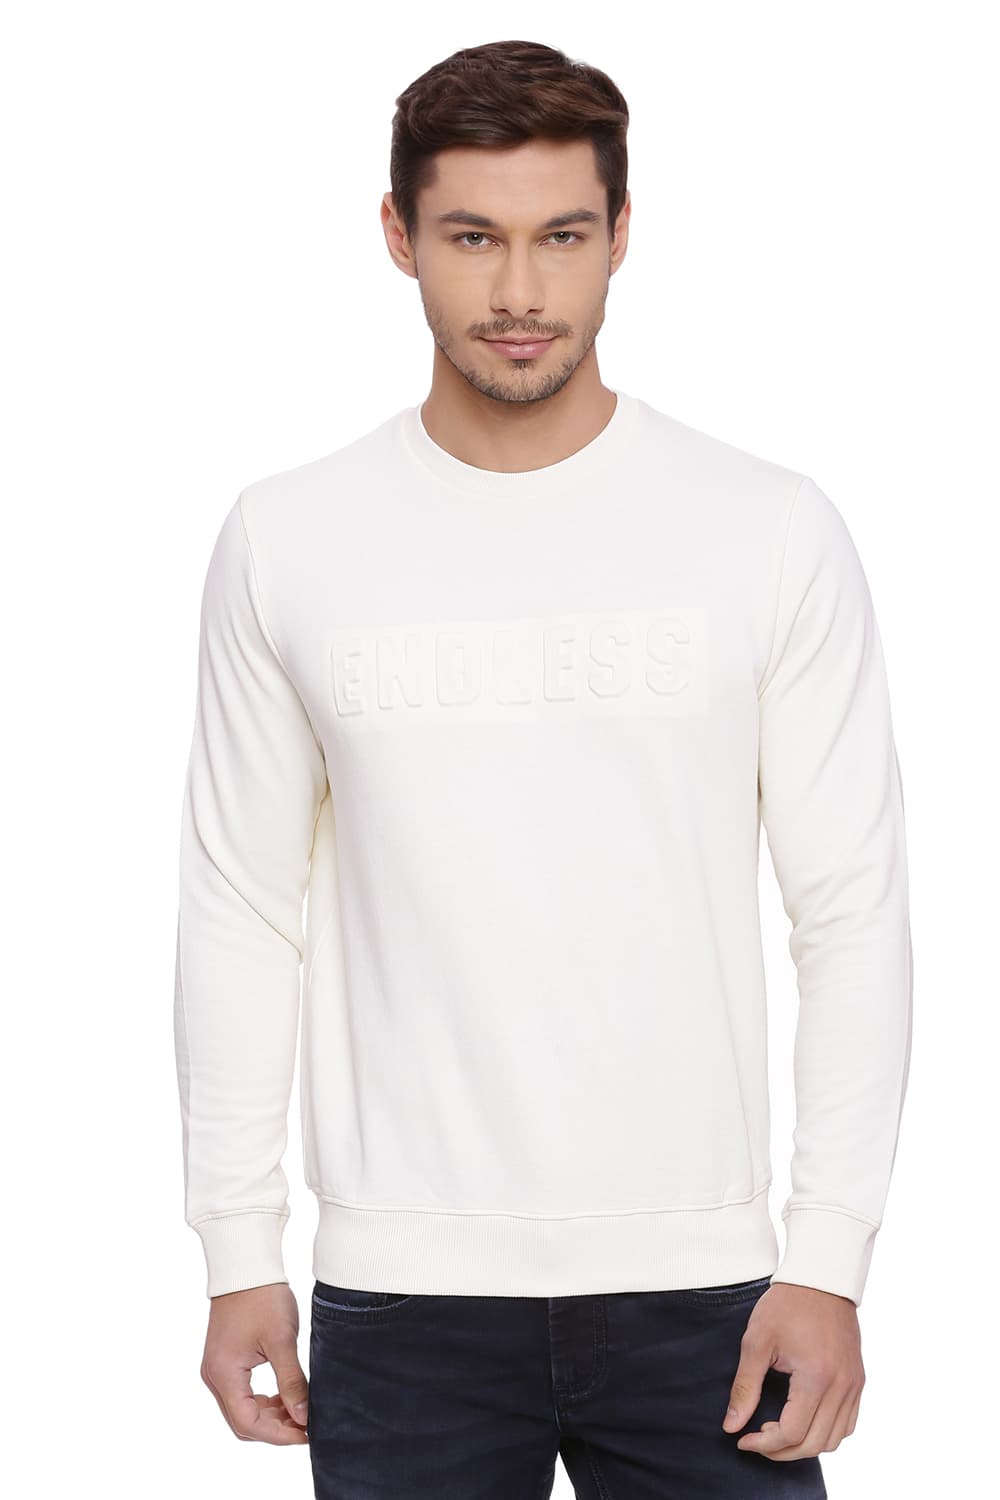 BASICS MUSCLE FIT PULLOVER SWEATER